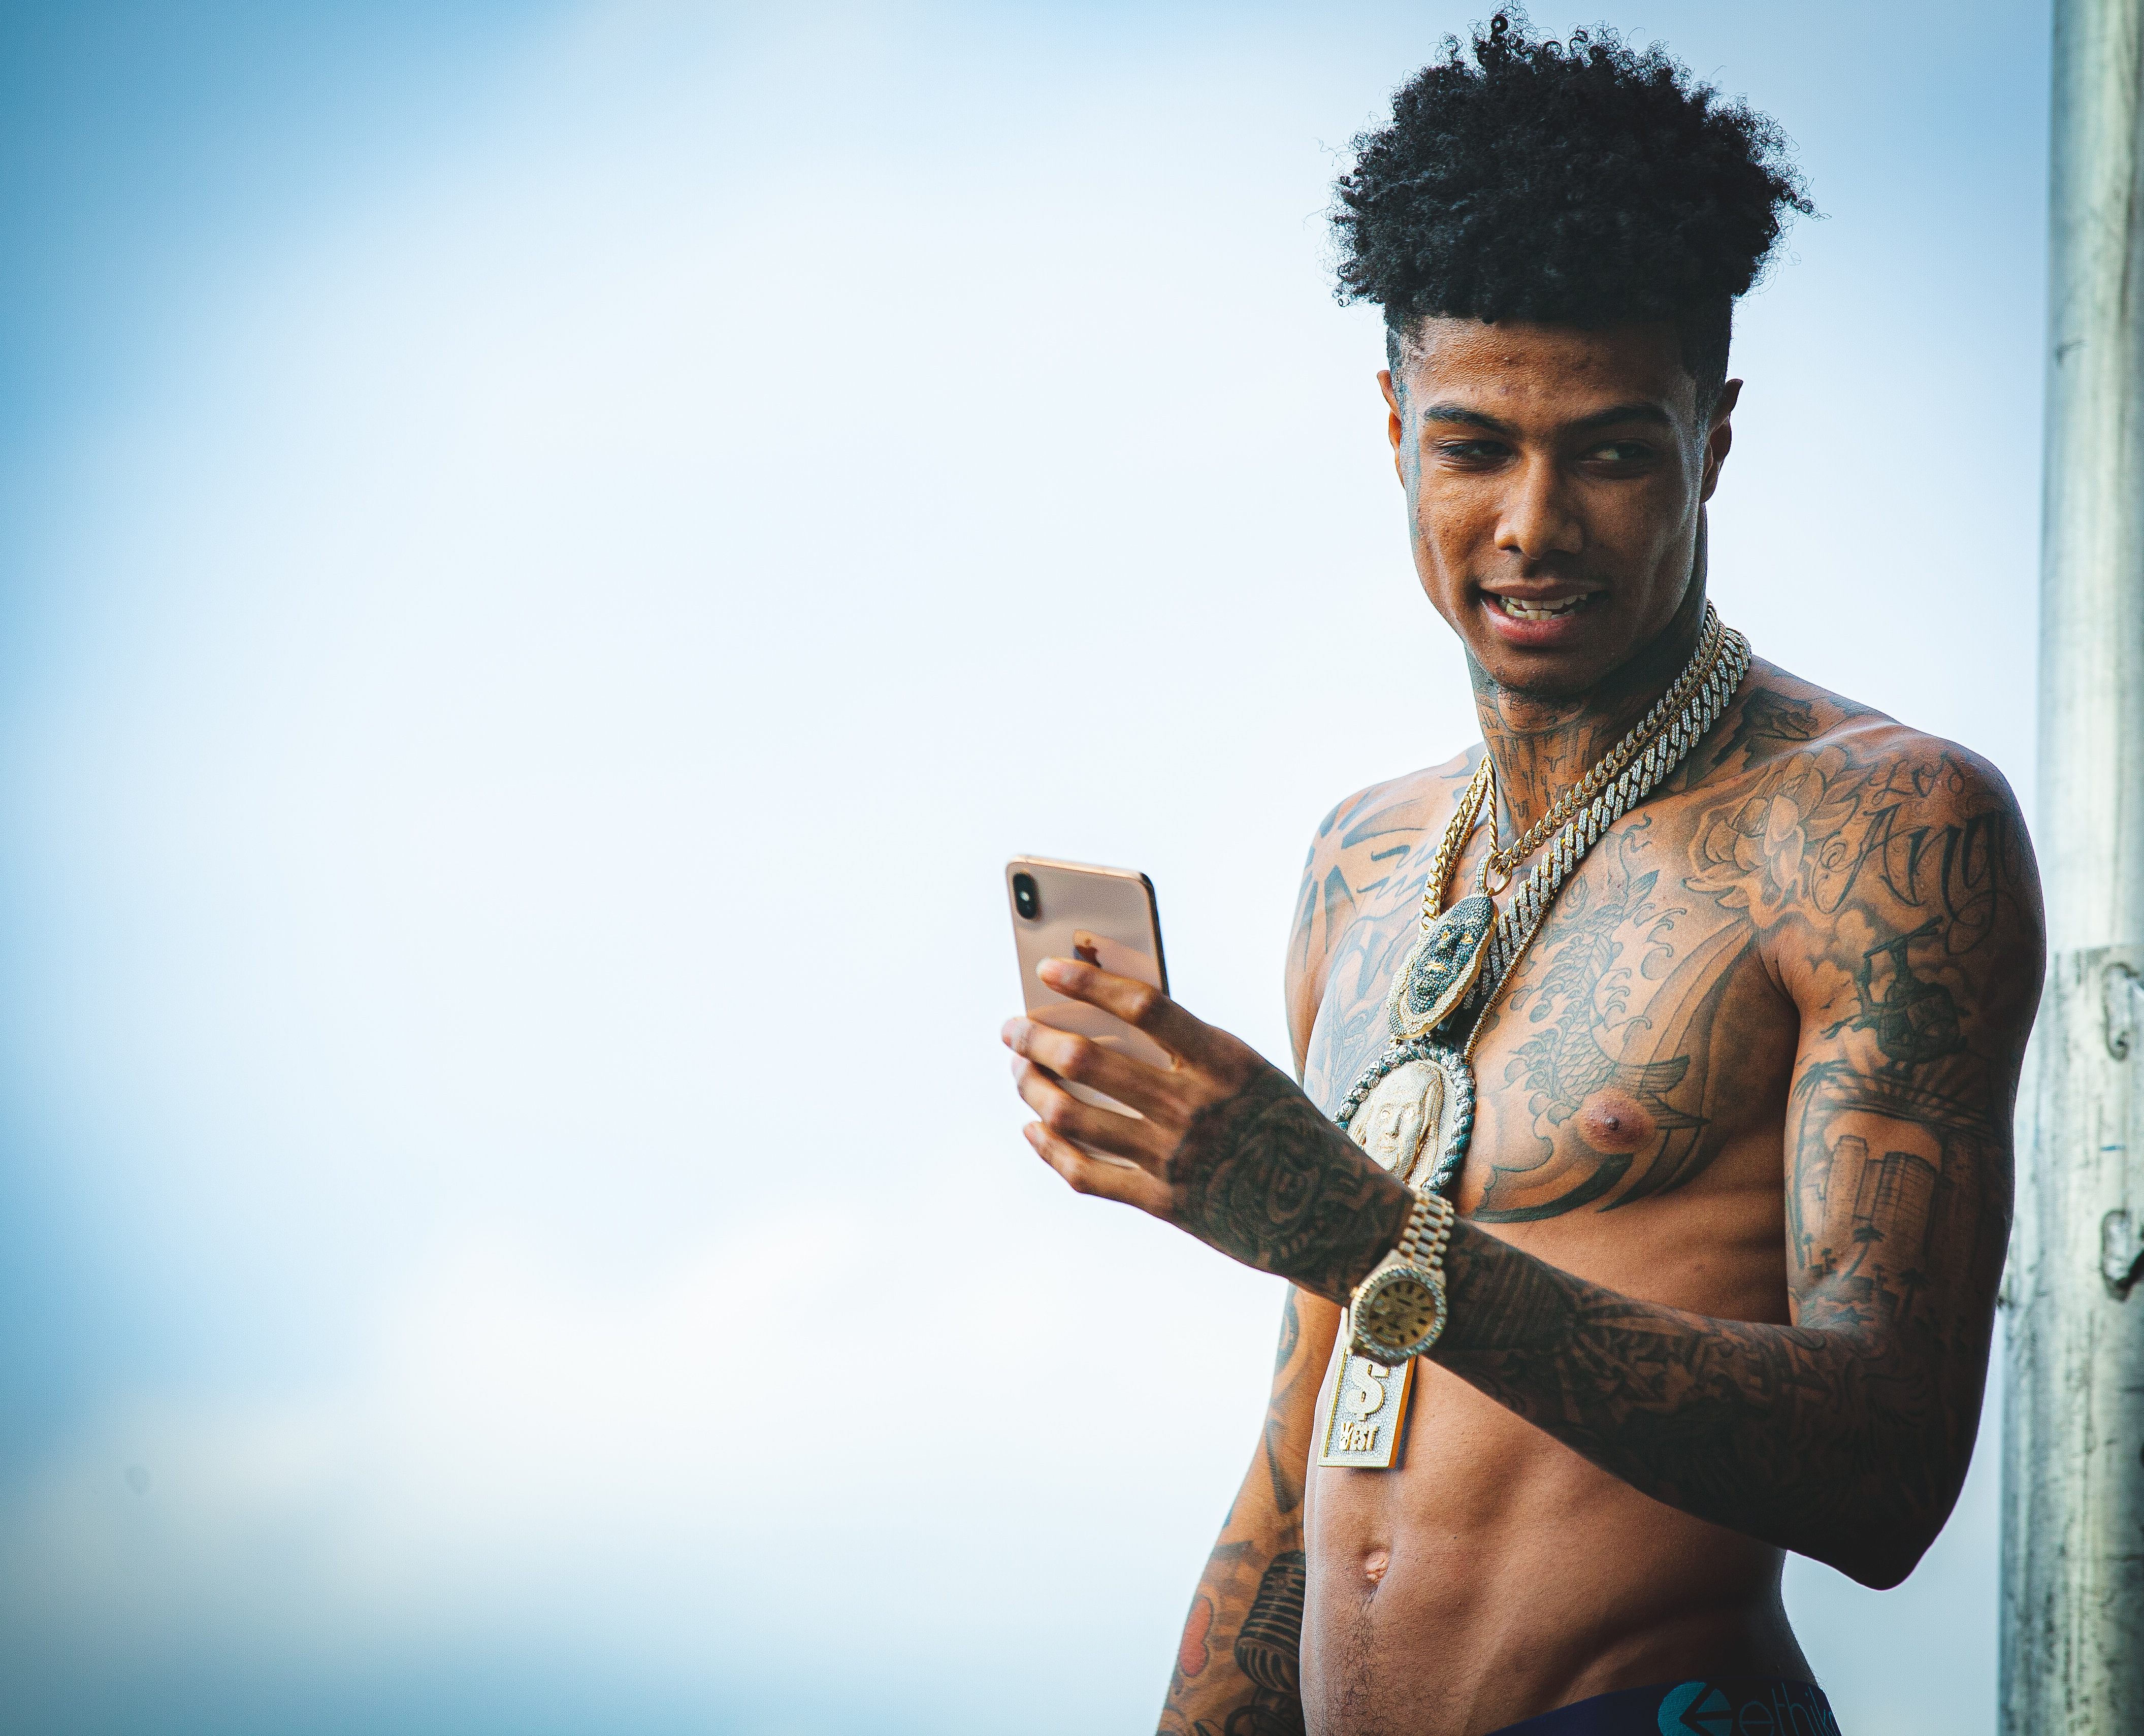 Twitter Is Comparing Blueface's BGC To A Cult After Tattoo or Go Home Video